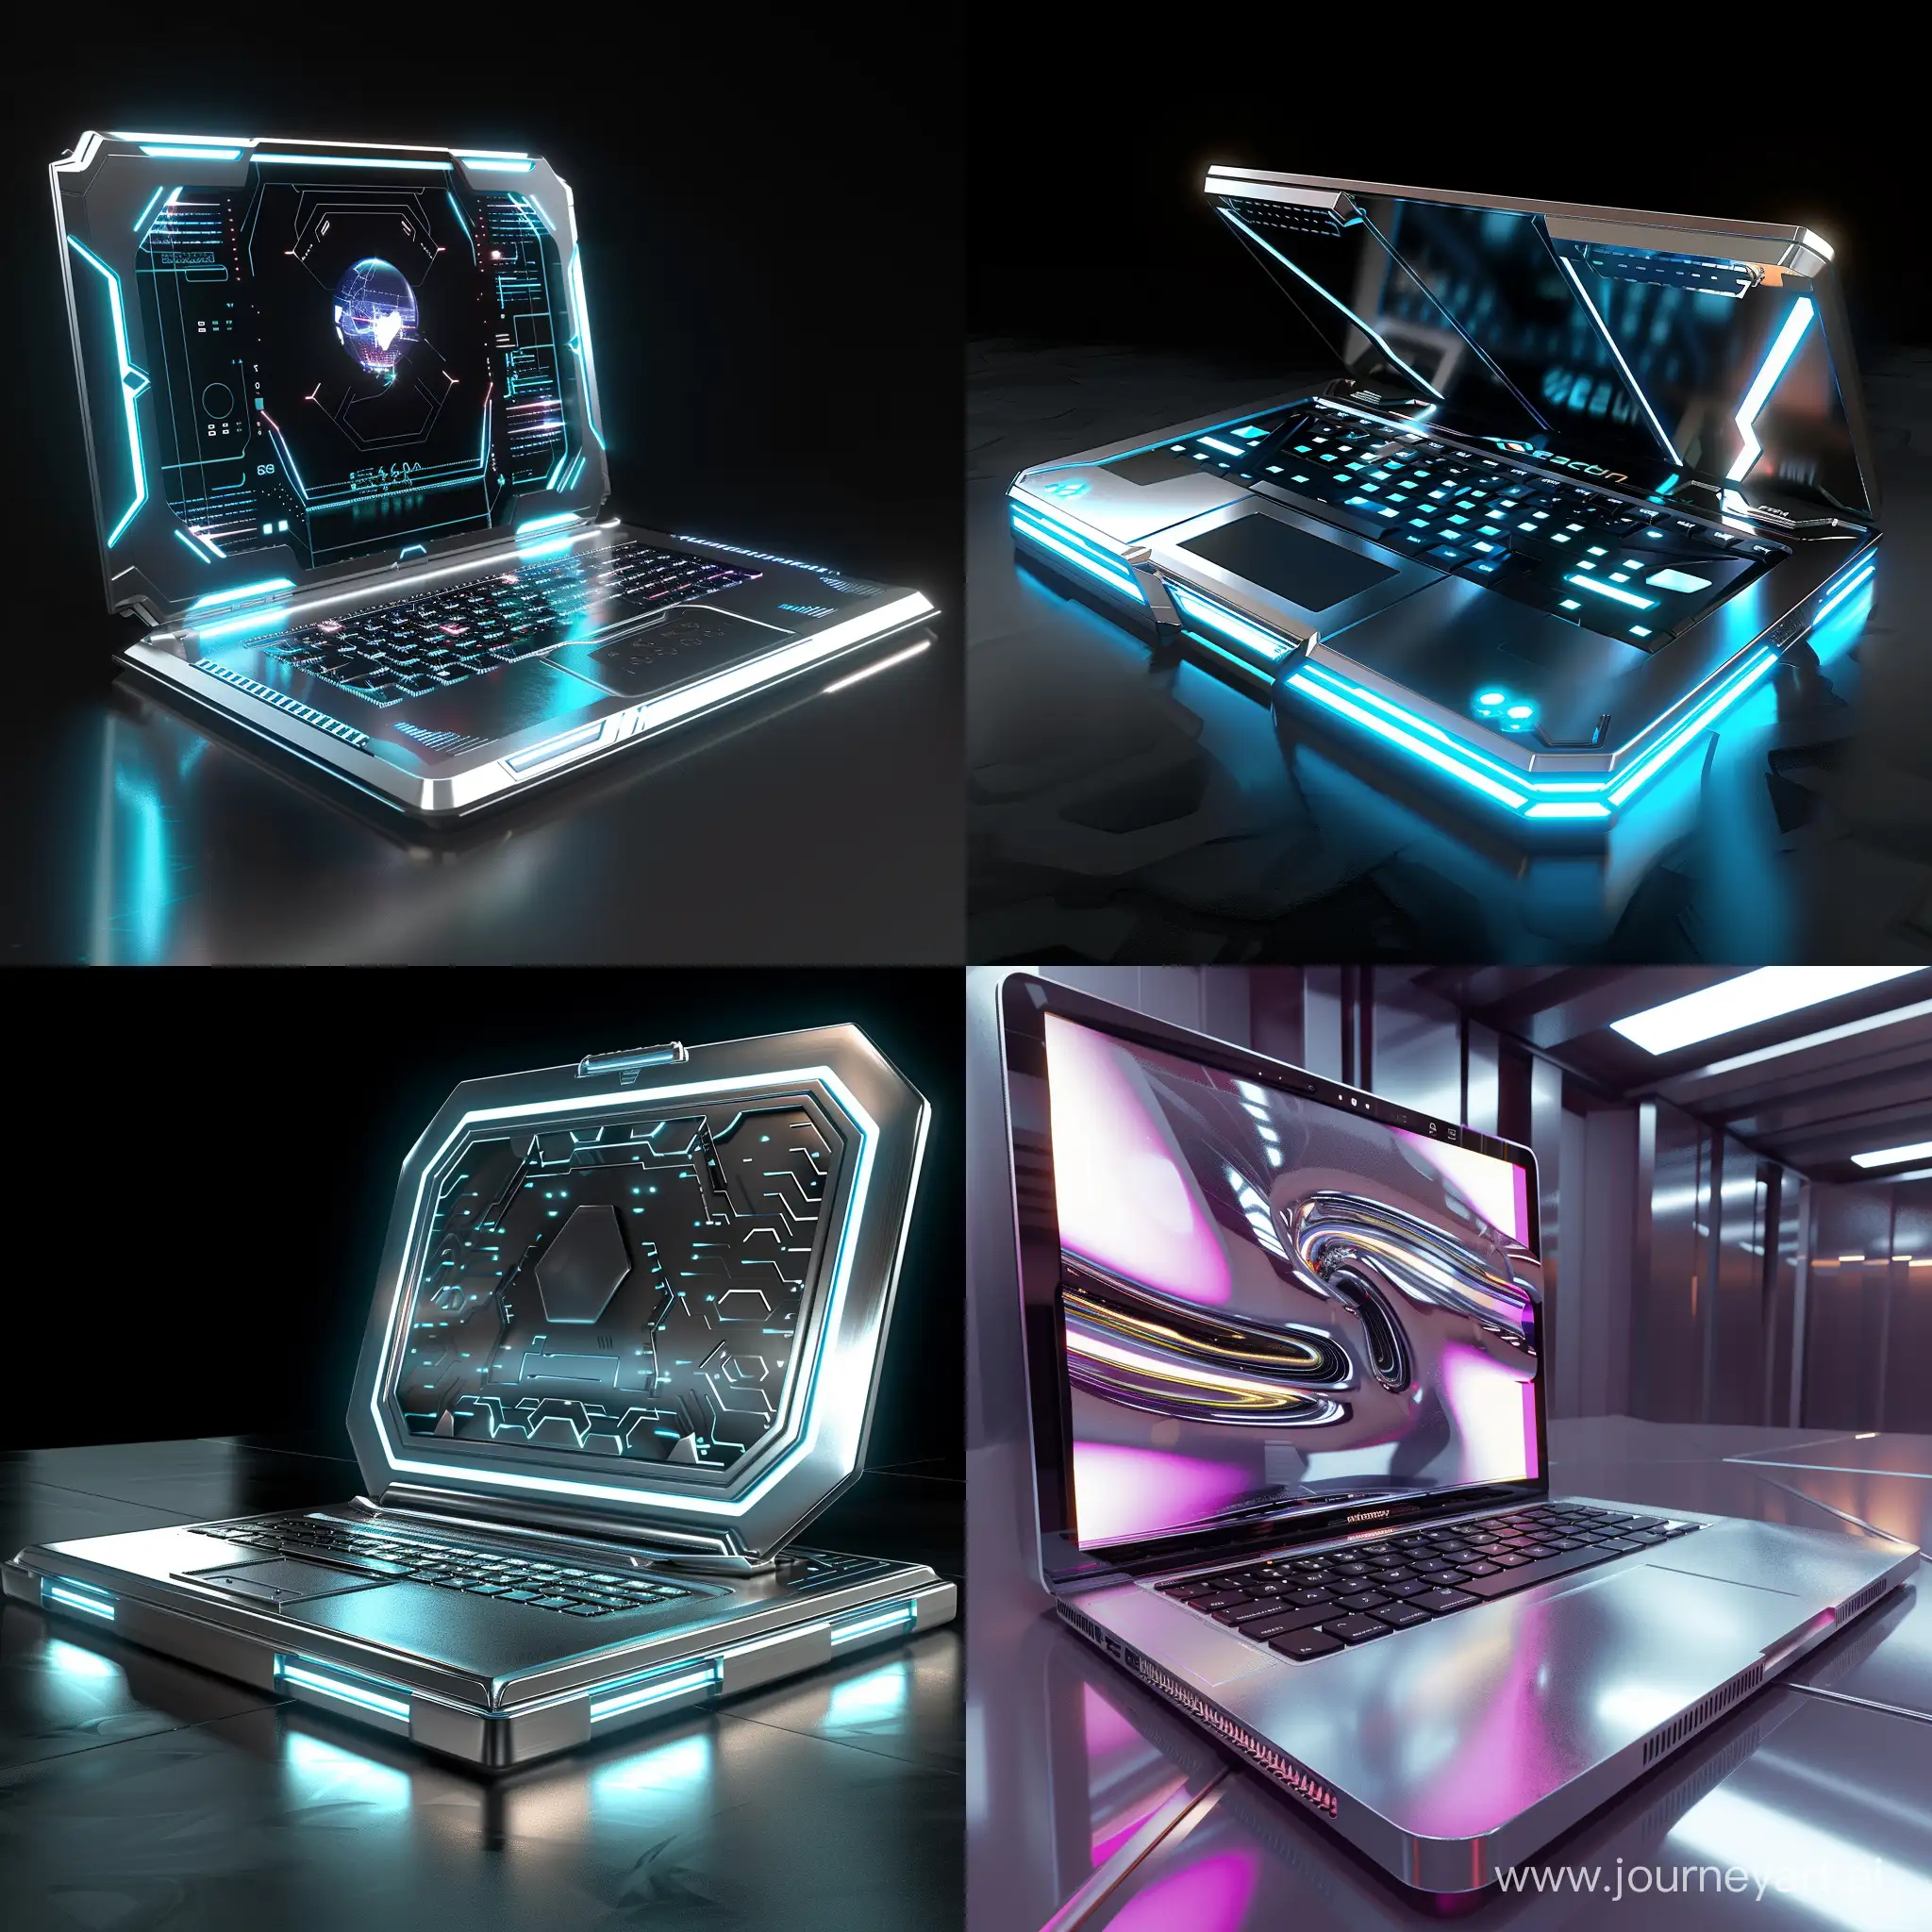 Futuristic-Stainless-Steel-Laptop-in-HighTech-World